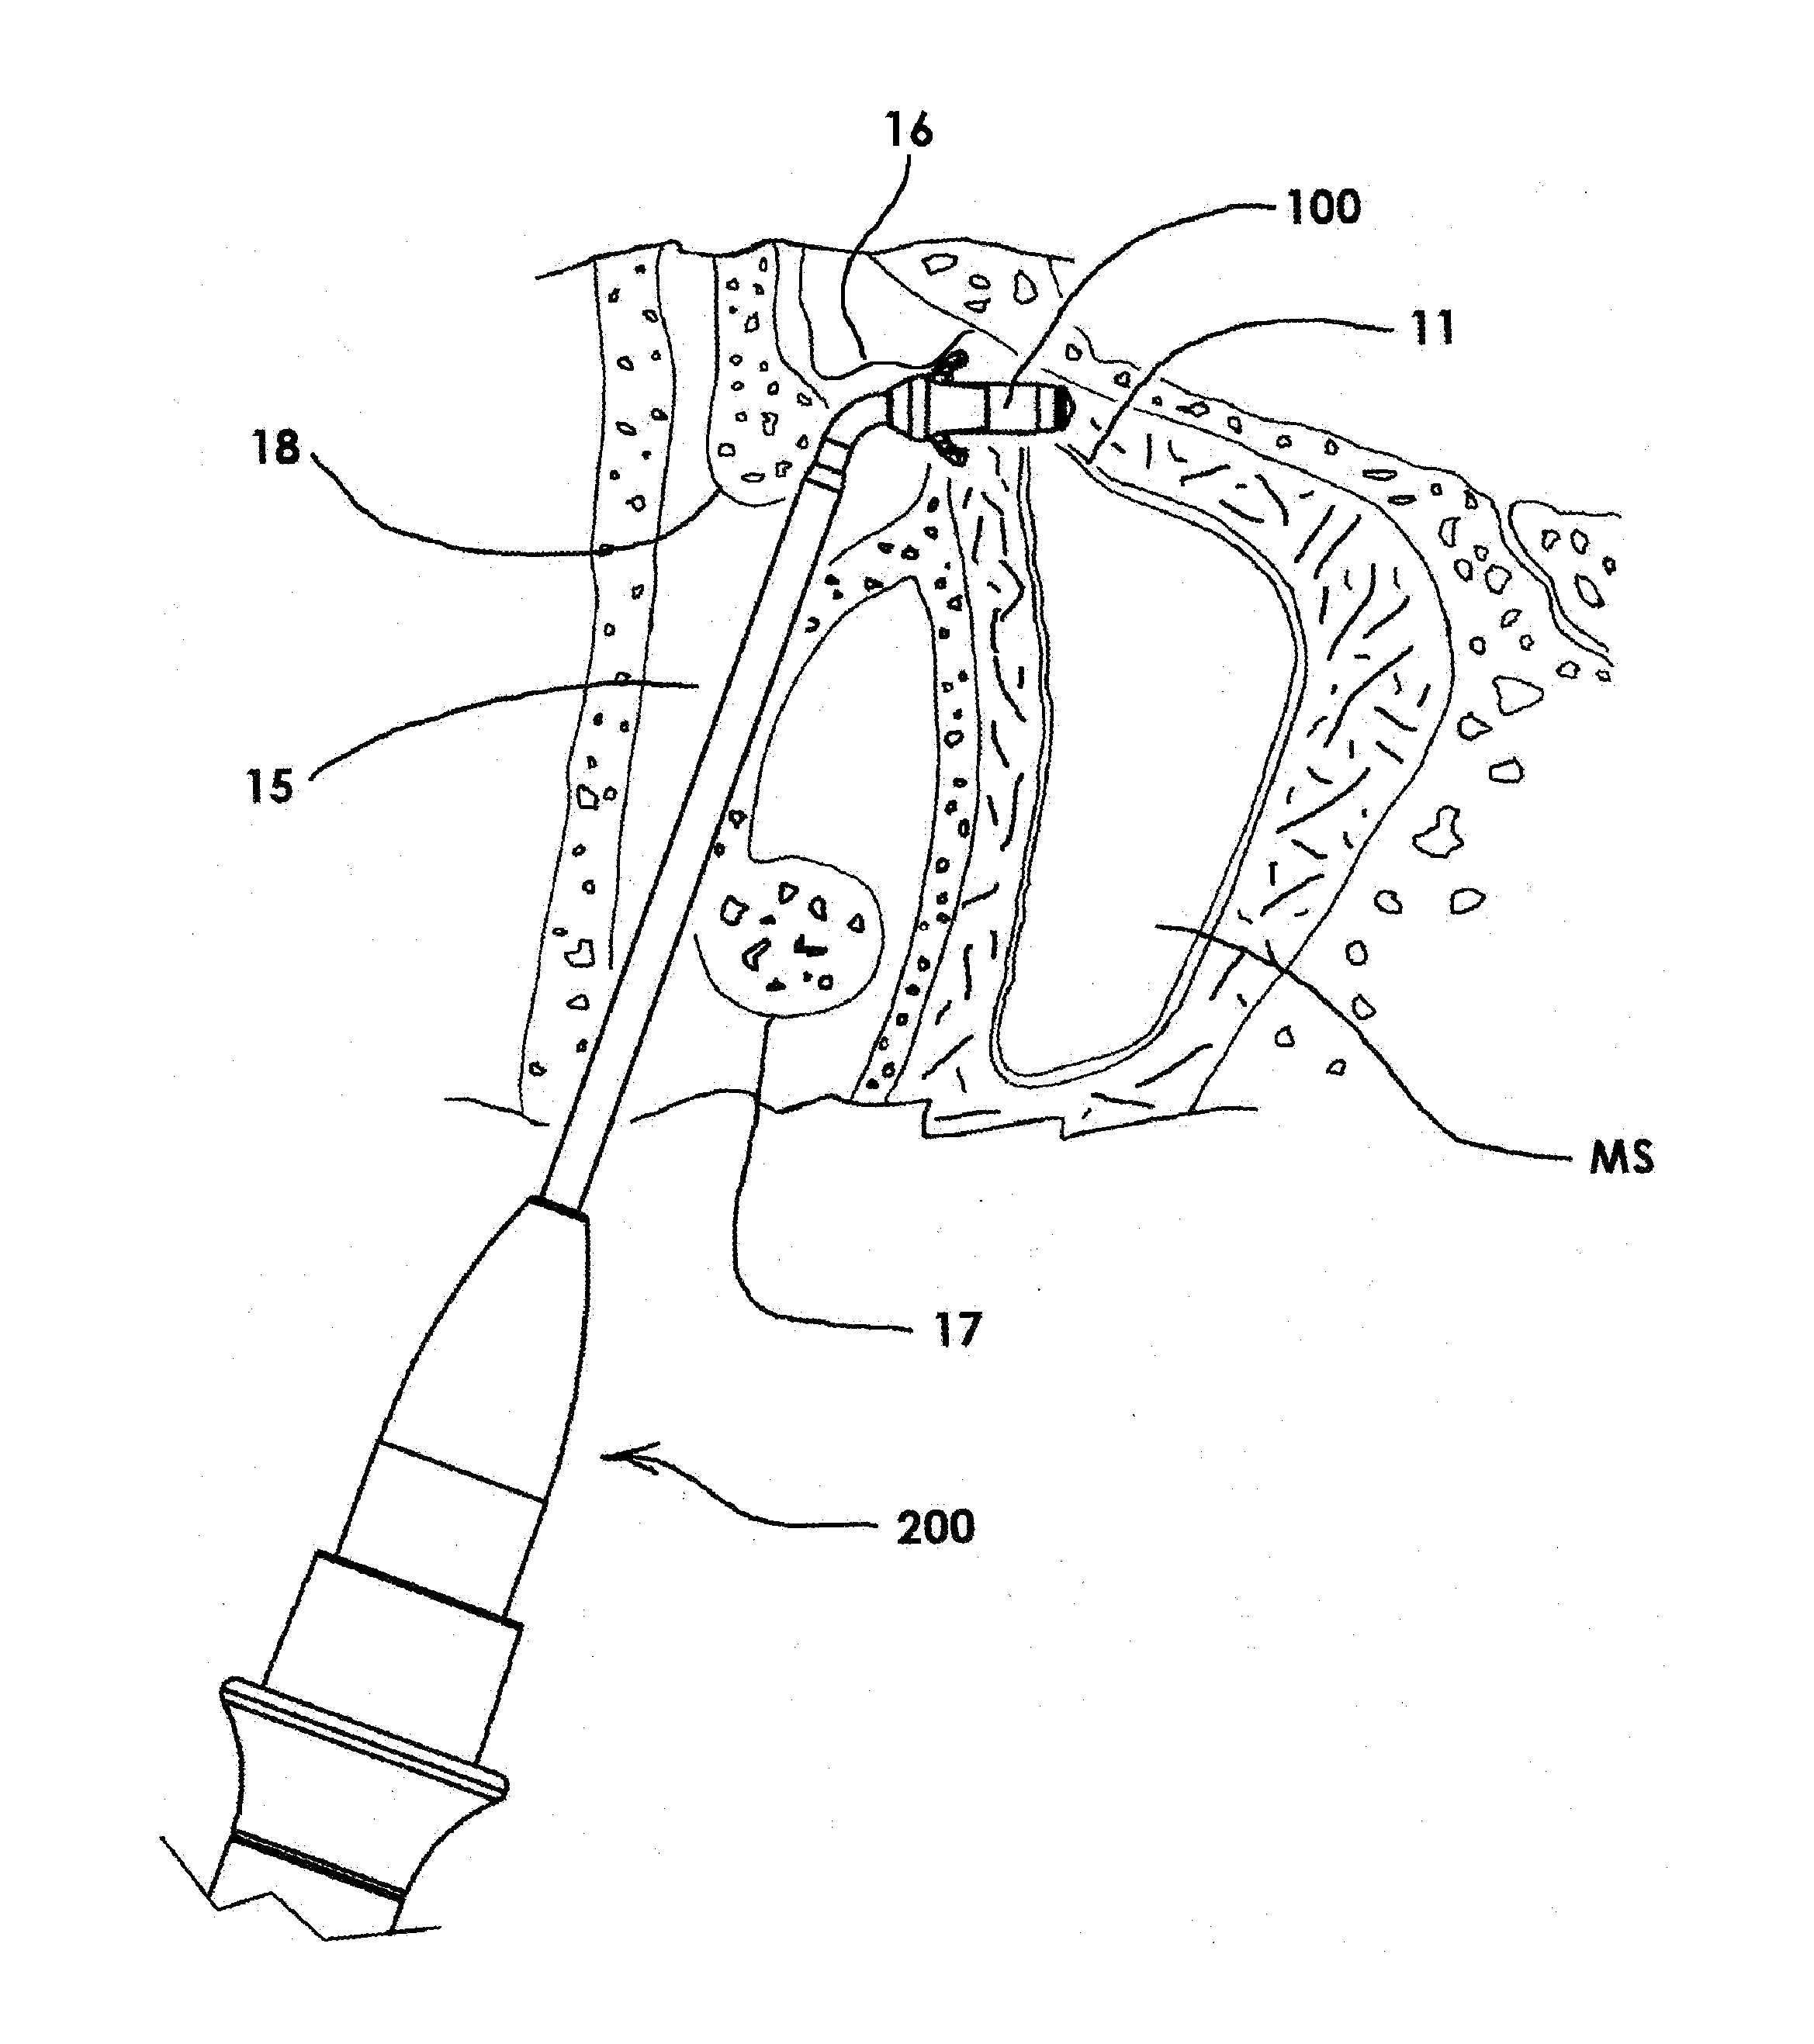 Devices and Methods for Dilating a Paranasal Sinus Opening and for Treating Sinusitis